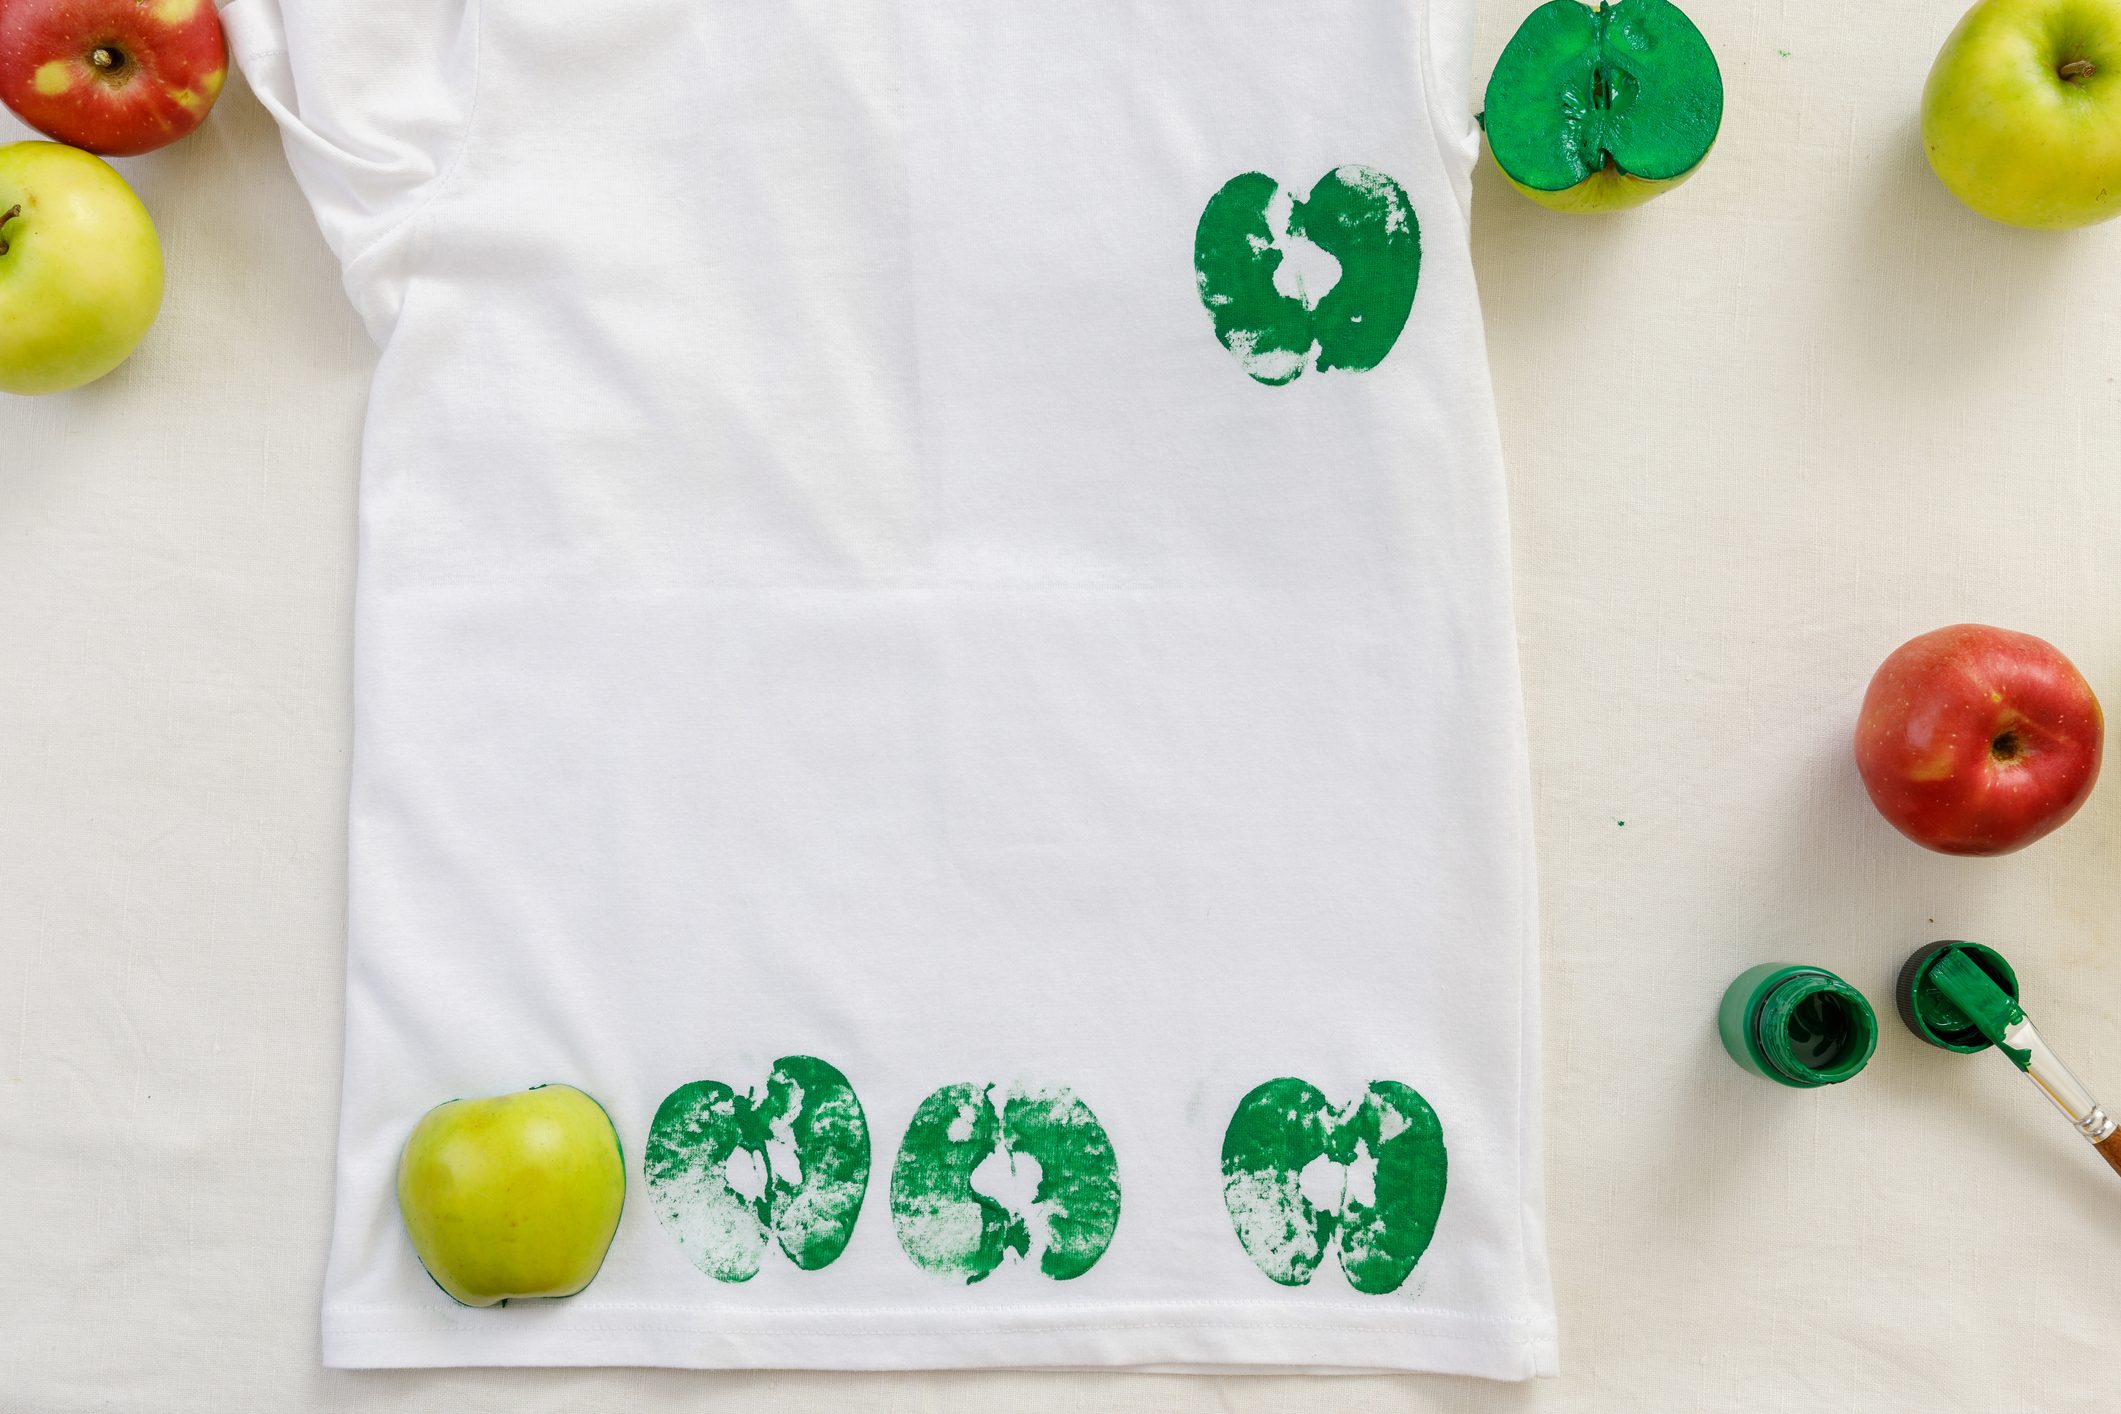 process of apple prints on clothes. step-by-step instruction